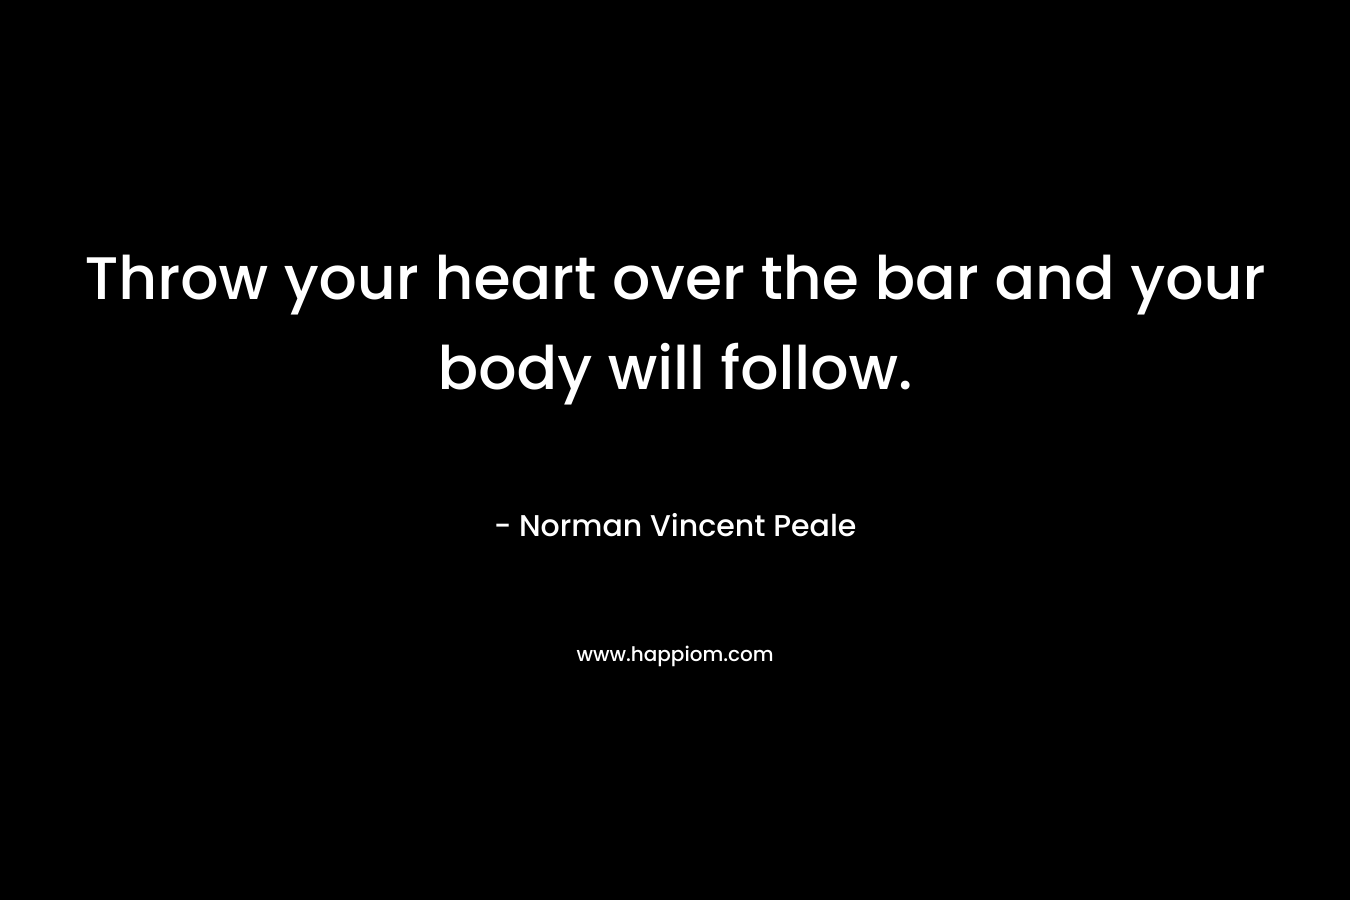 Throw your heart over the bar and your body will follow. – Norman Vincent Peale